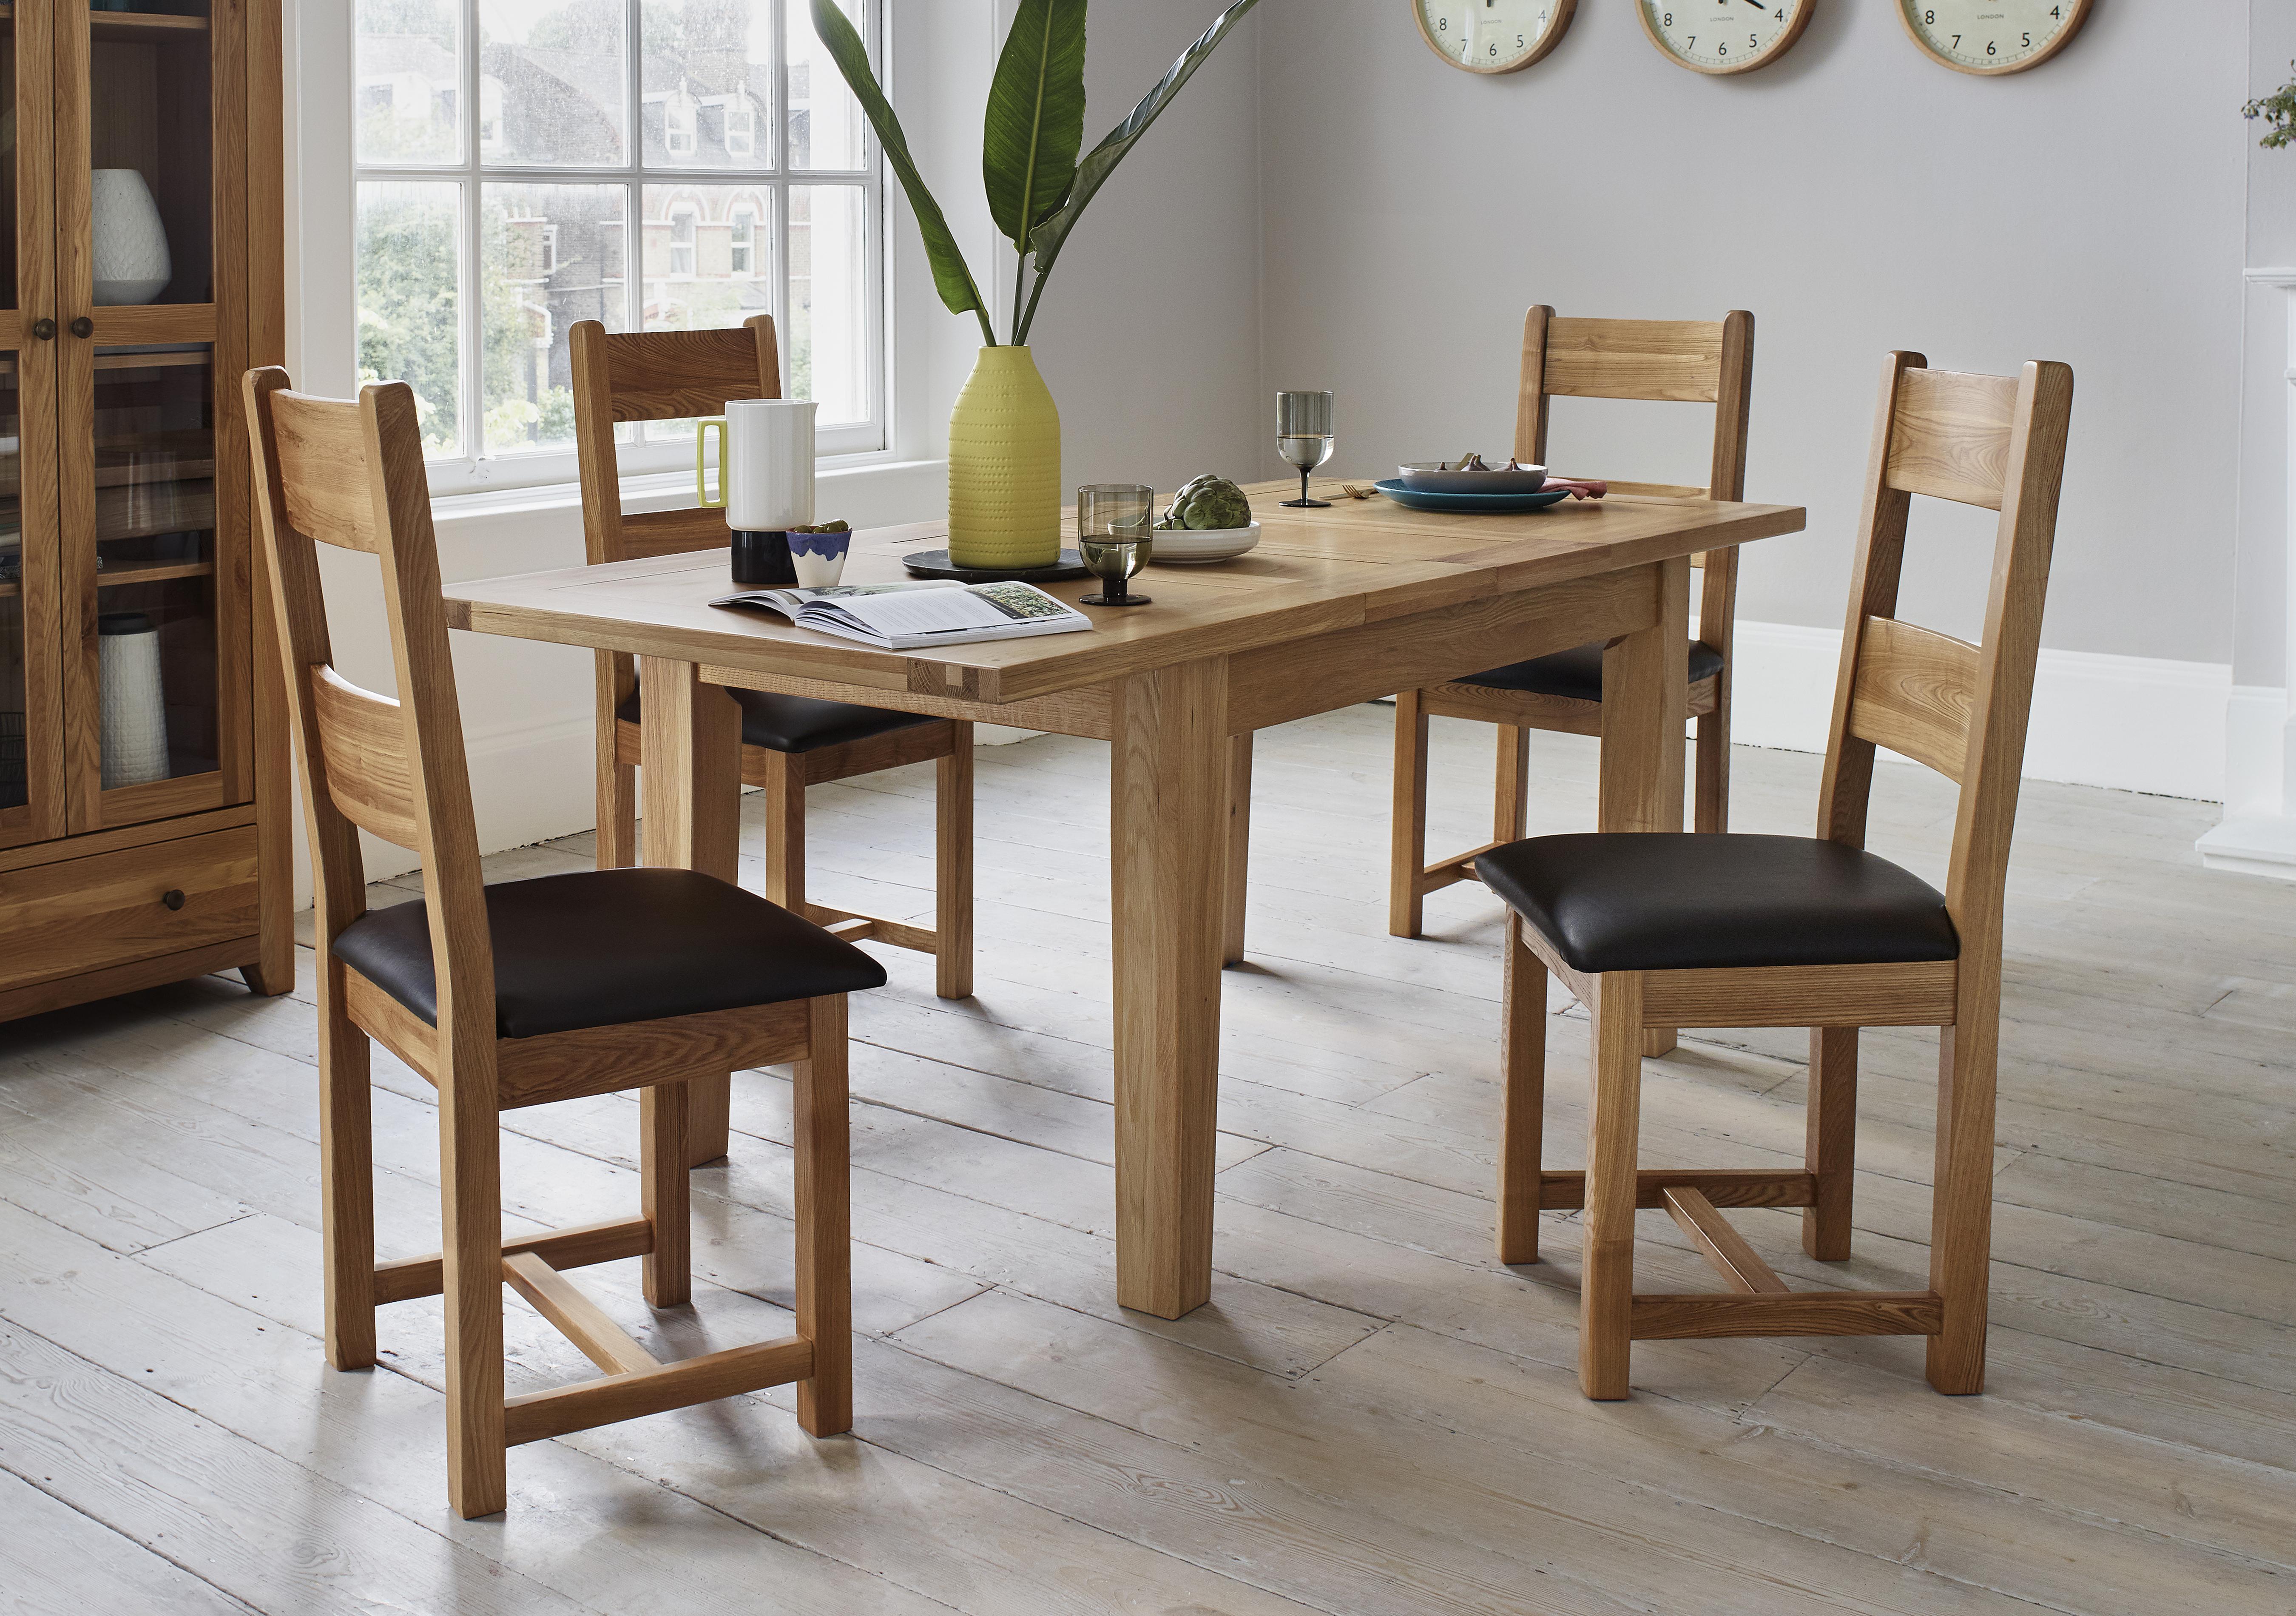 California Solid Oak Rectangular Extending Table and 4 Wooden Chairs in  on Furniture Village